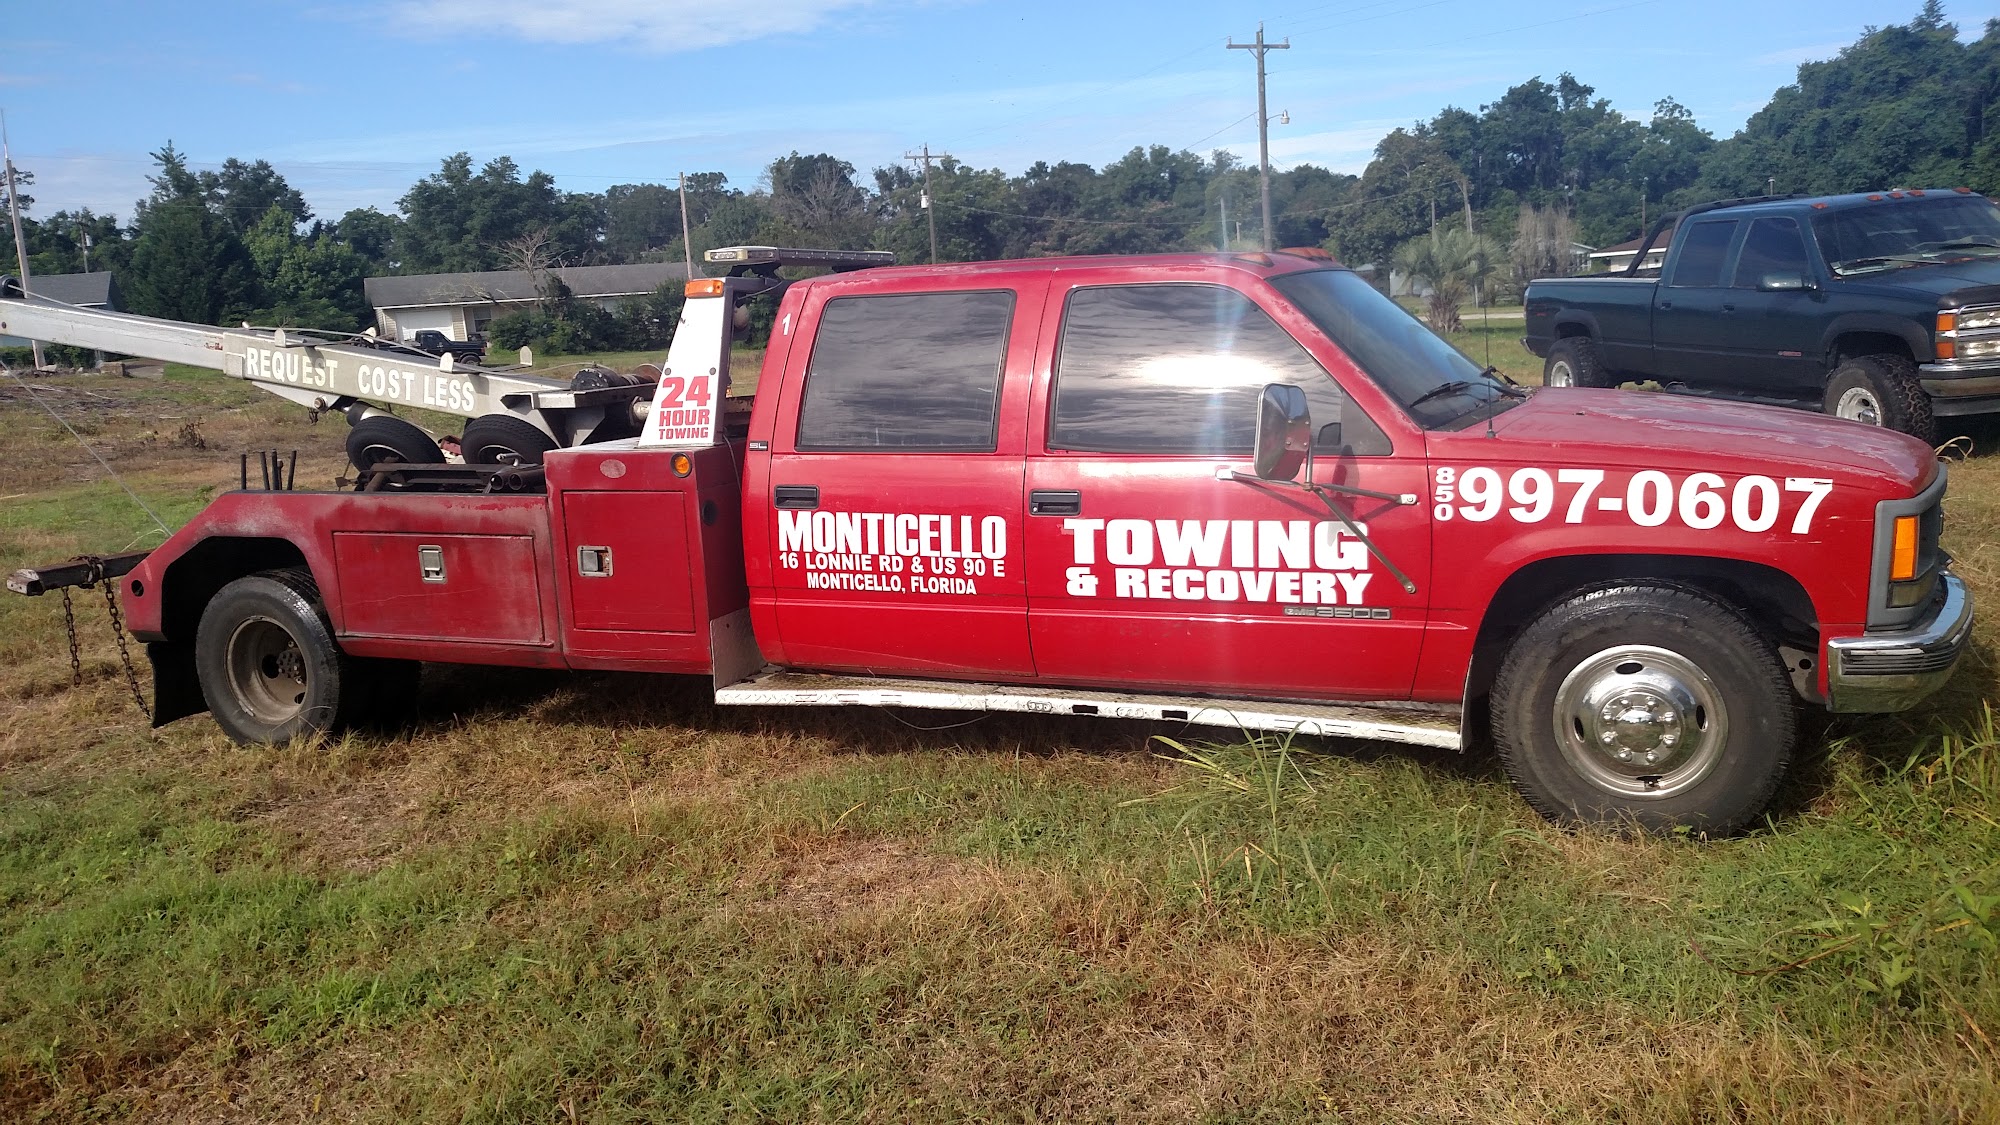 Monticello Towing